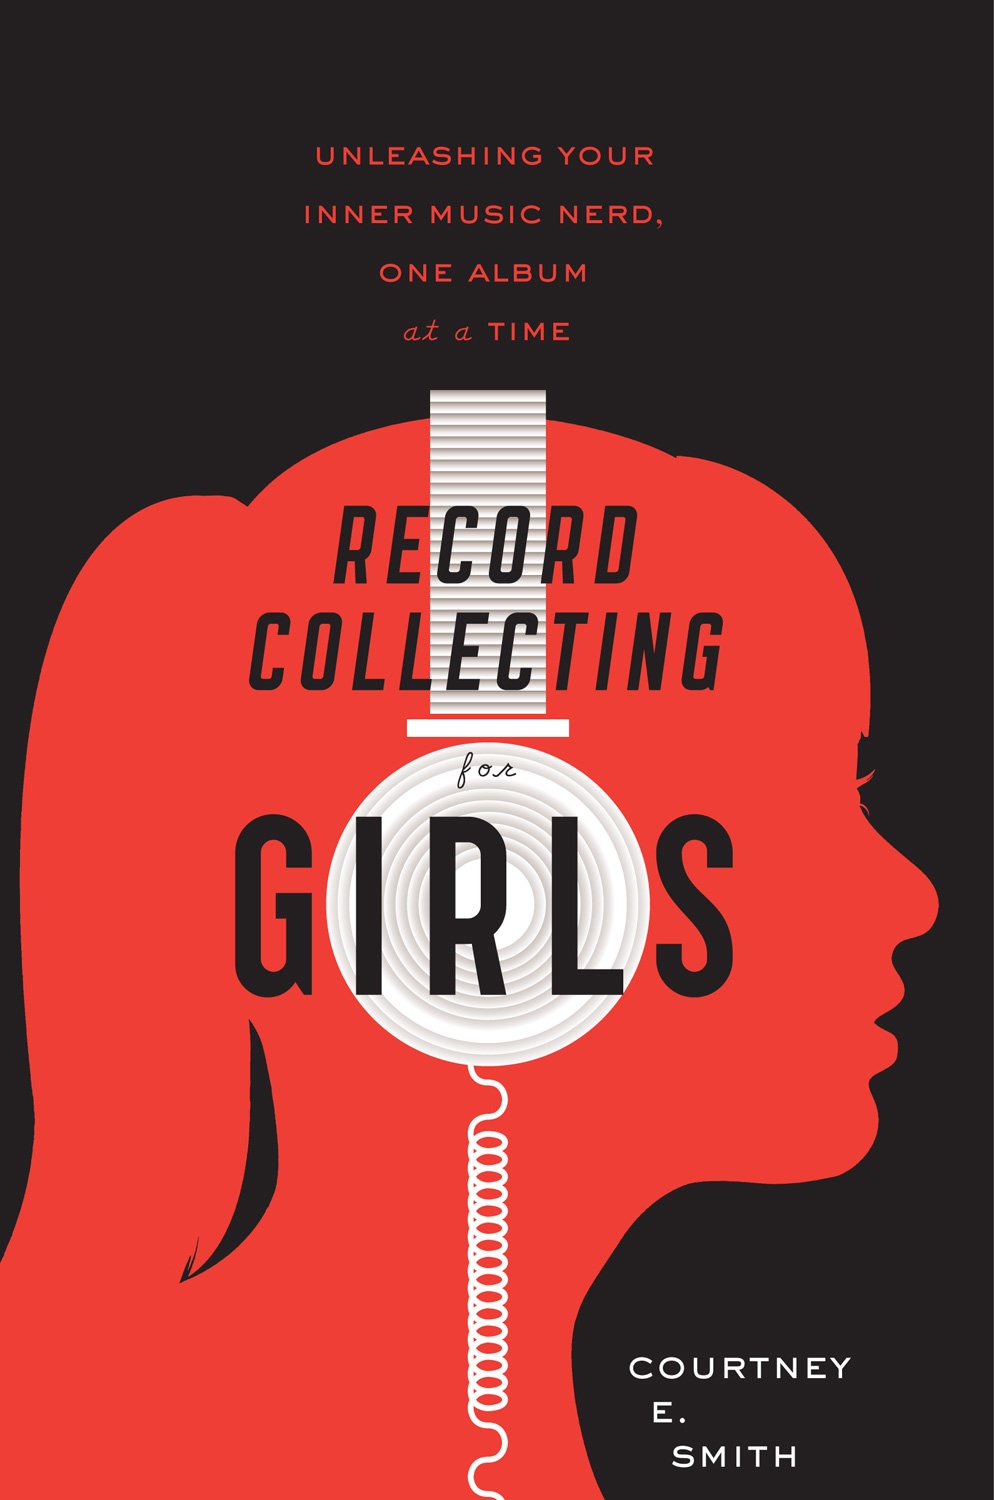 Record Collecting For Girls by Courtney E. Smith